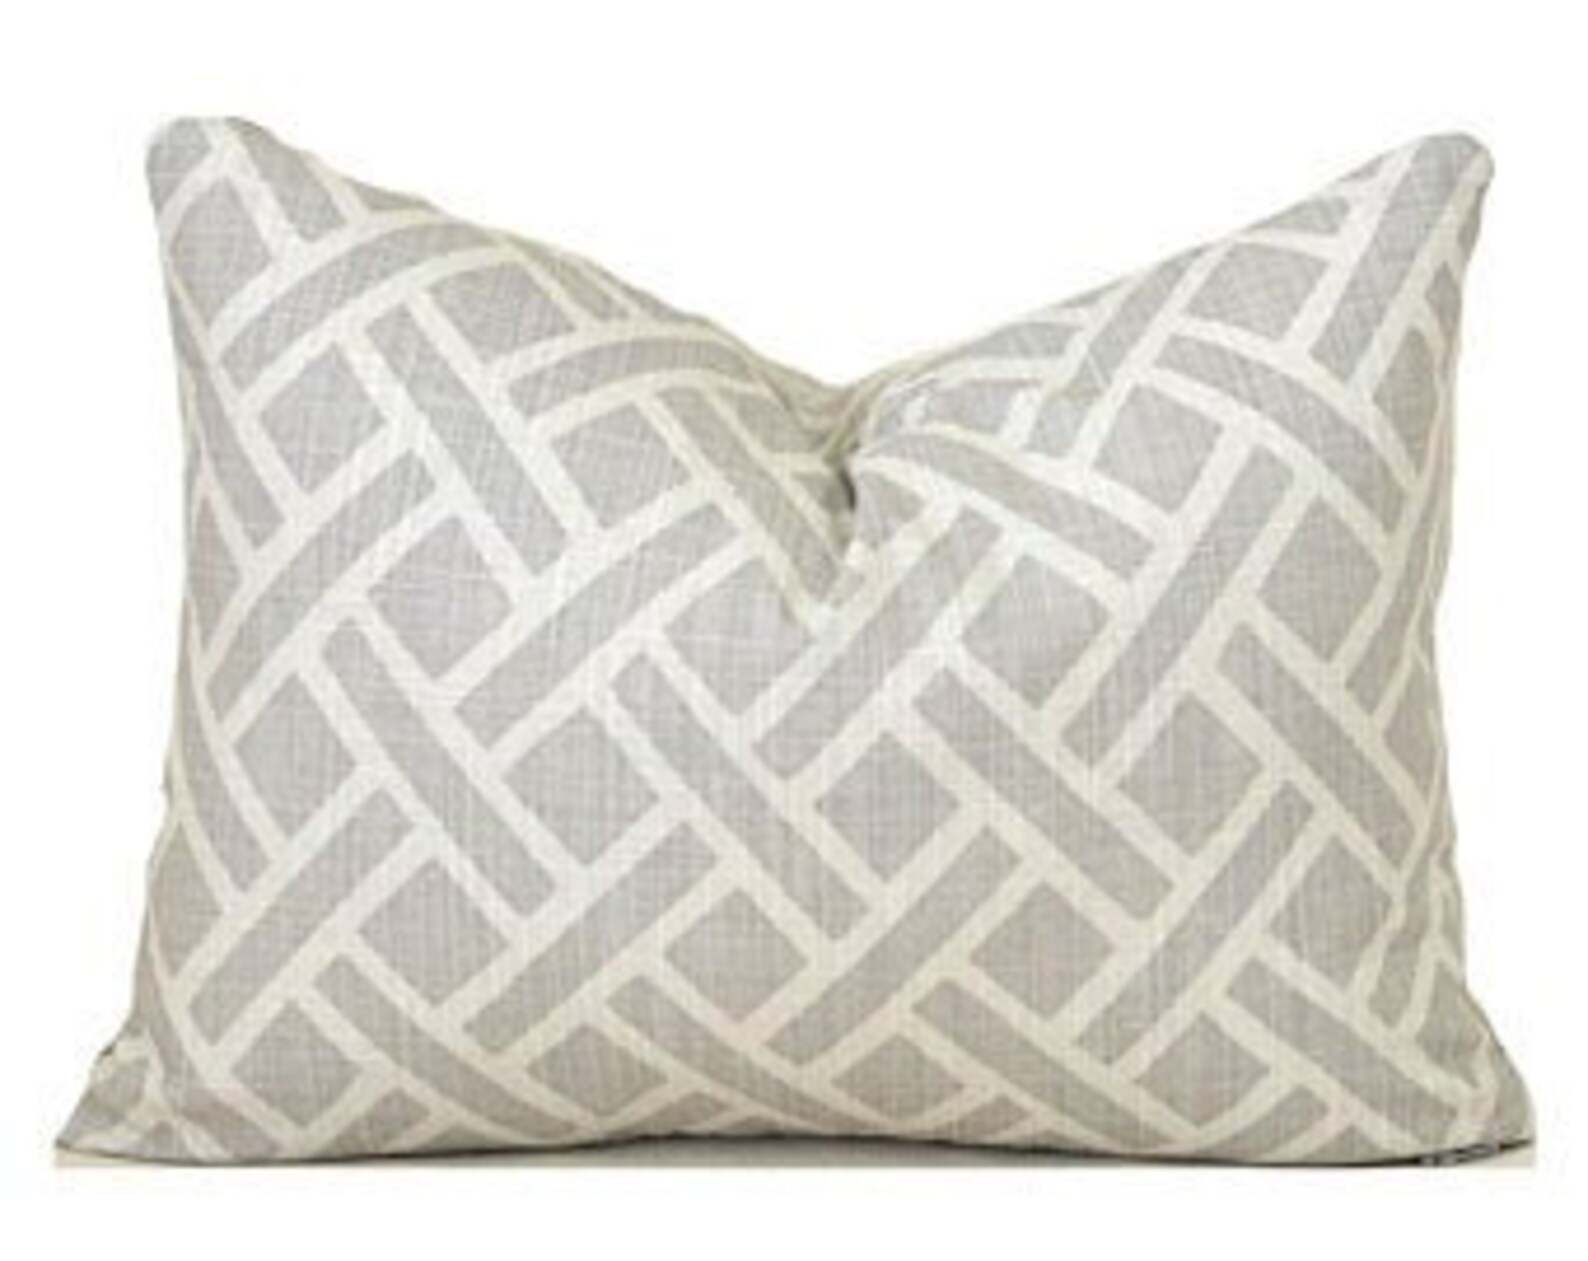 CLEARANCE 16x12 Lumbar Pillow Cover Decorative Etsy